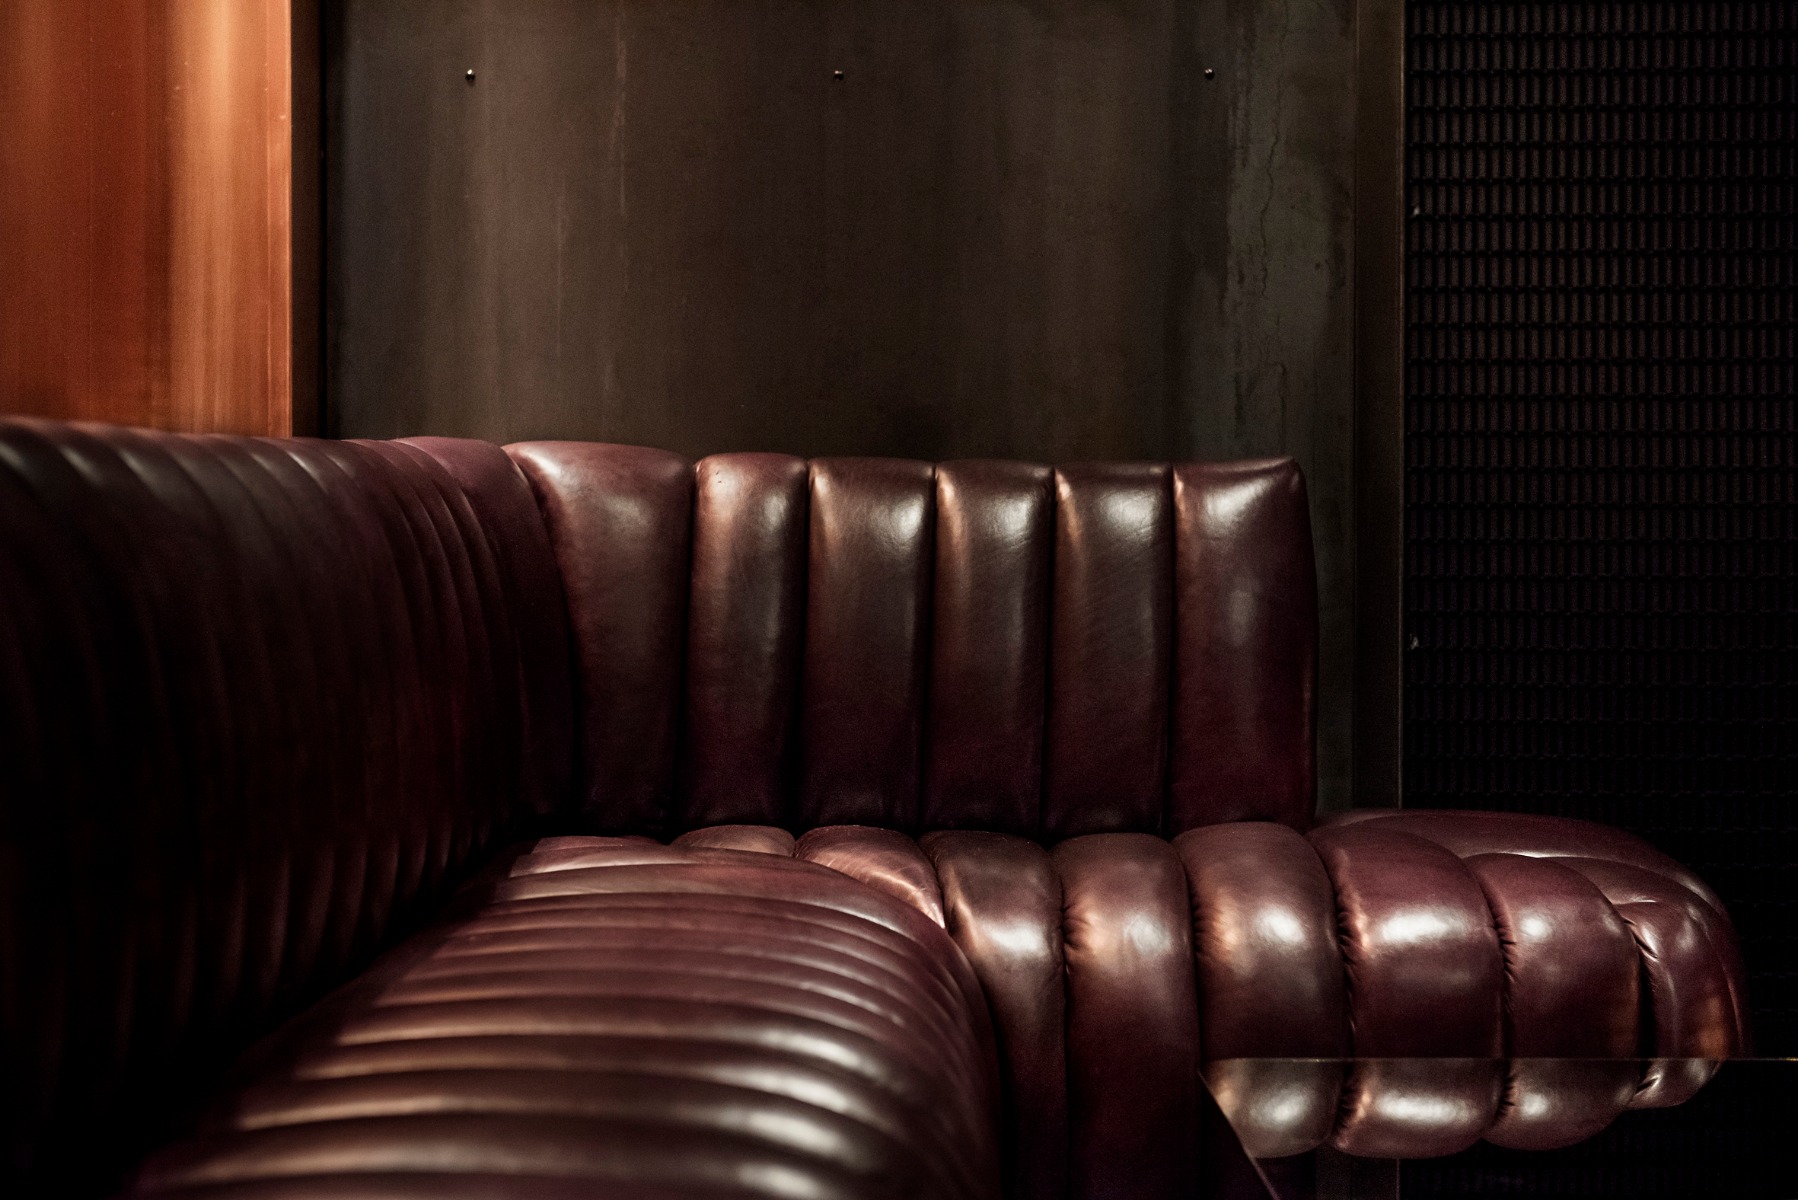 Detail of the custom leather banquette at Himitsu in Atlanta, designed by Tom Dixon Studio.